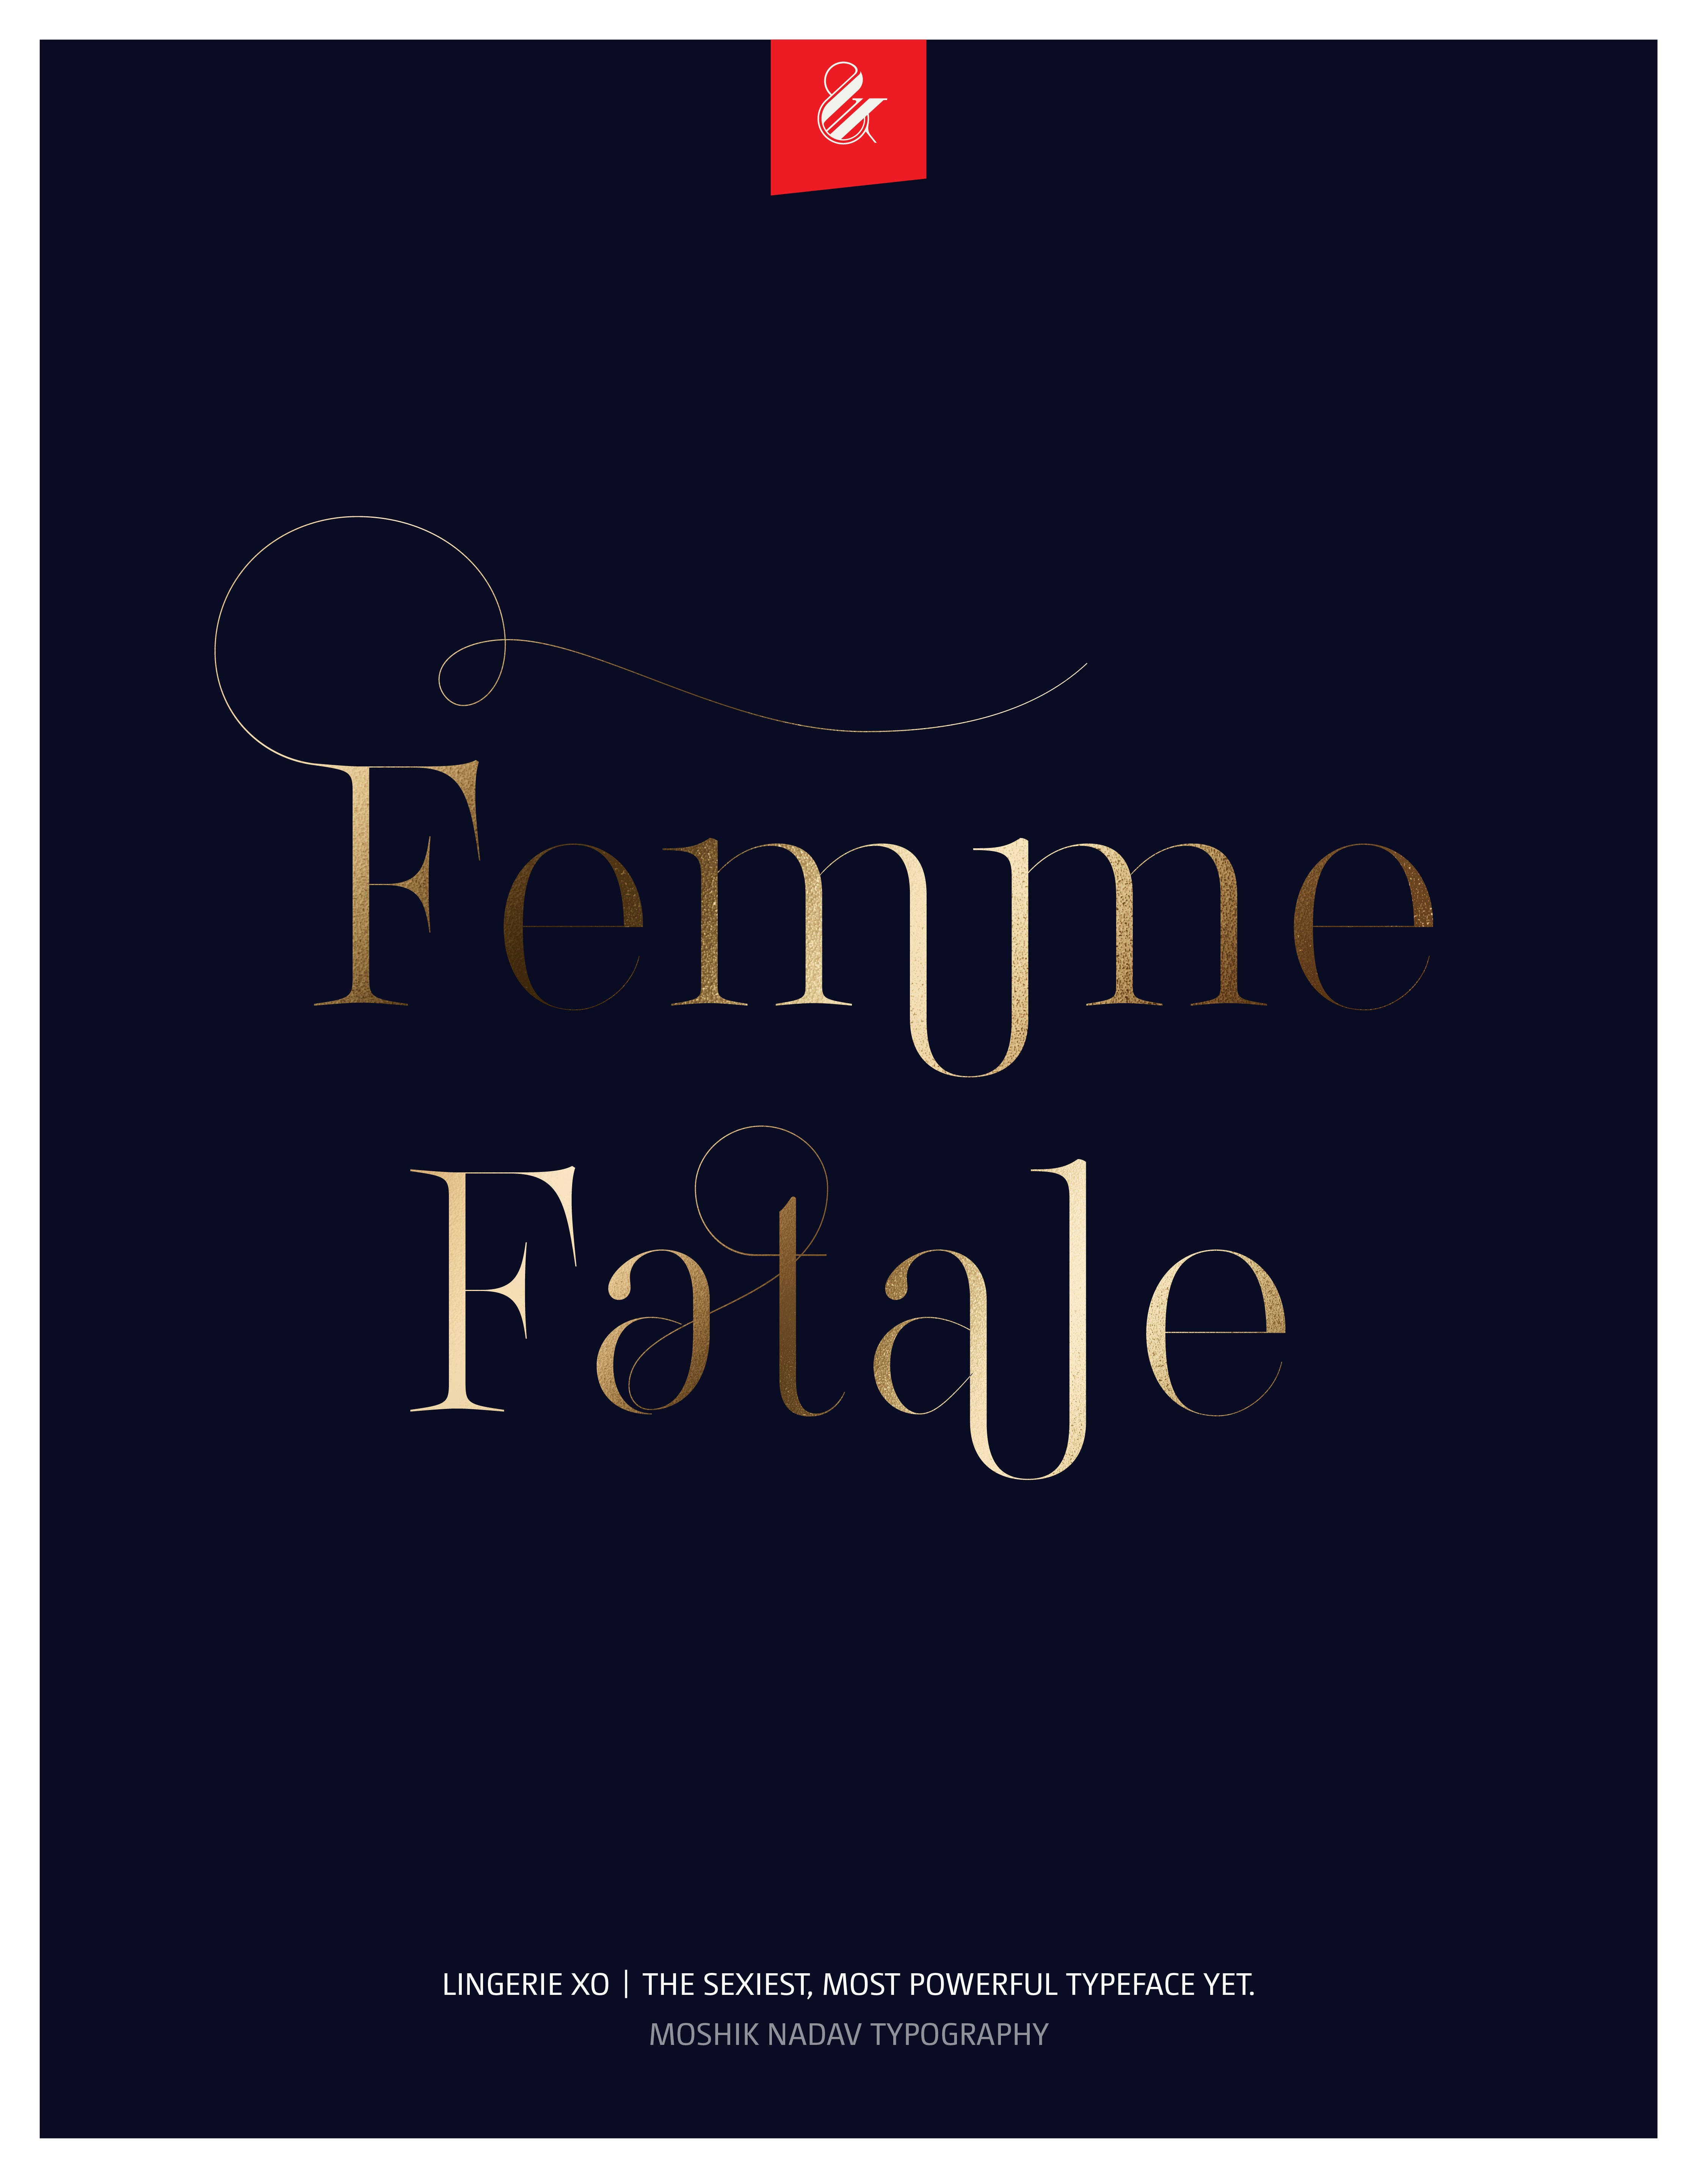 Femme Fatale - Designed with the sexy font Lingerie XO by Moshik Nadav Fashion Typography NYC